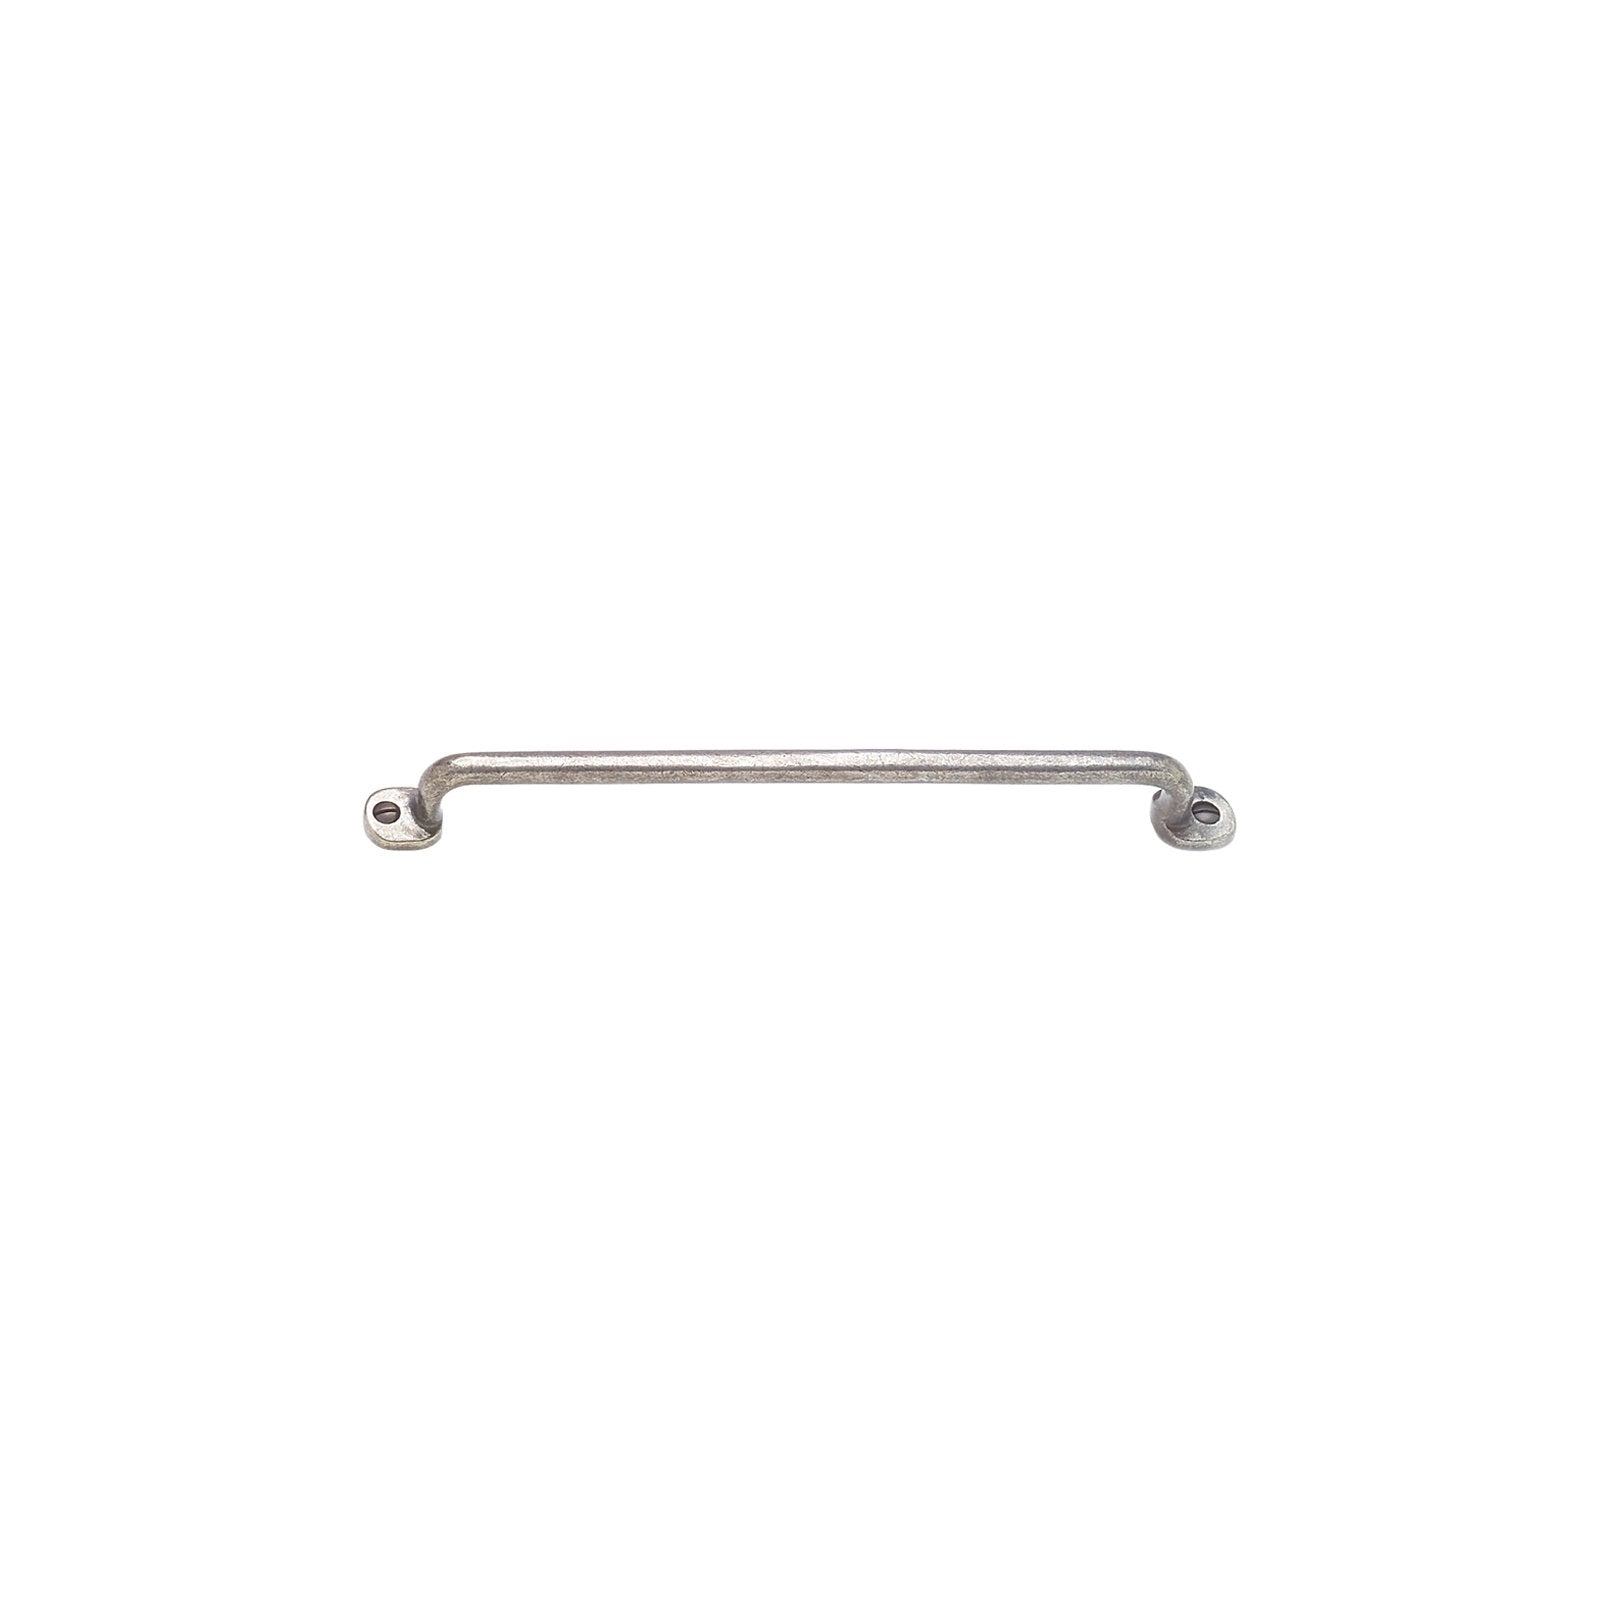 Rocky Mountain Hardware Sash Front Mounting Cabinet Pull, 9 7/8"